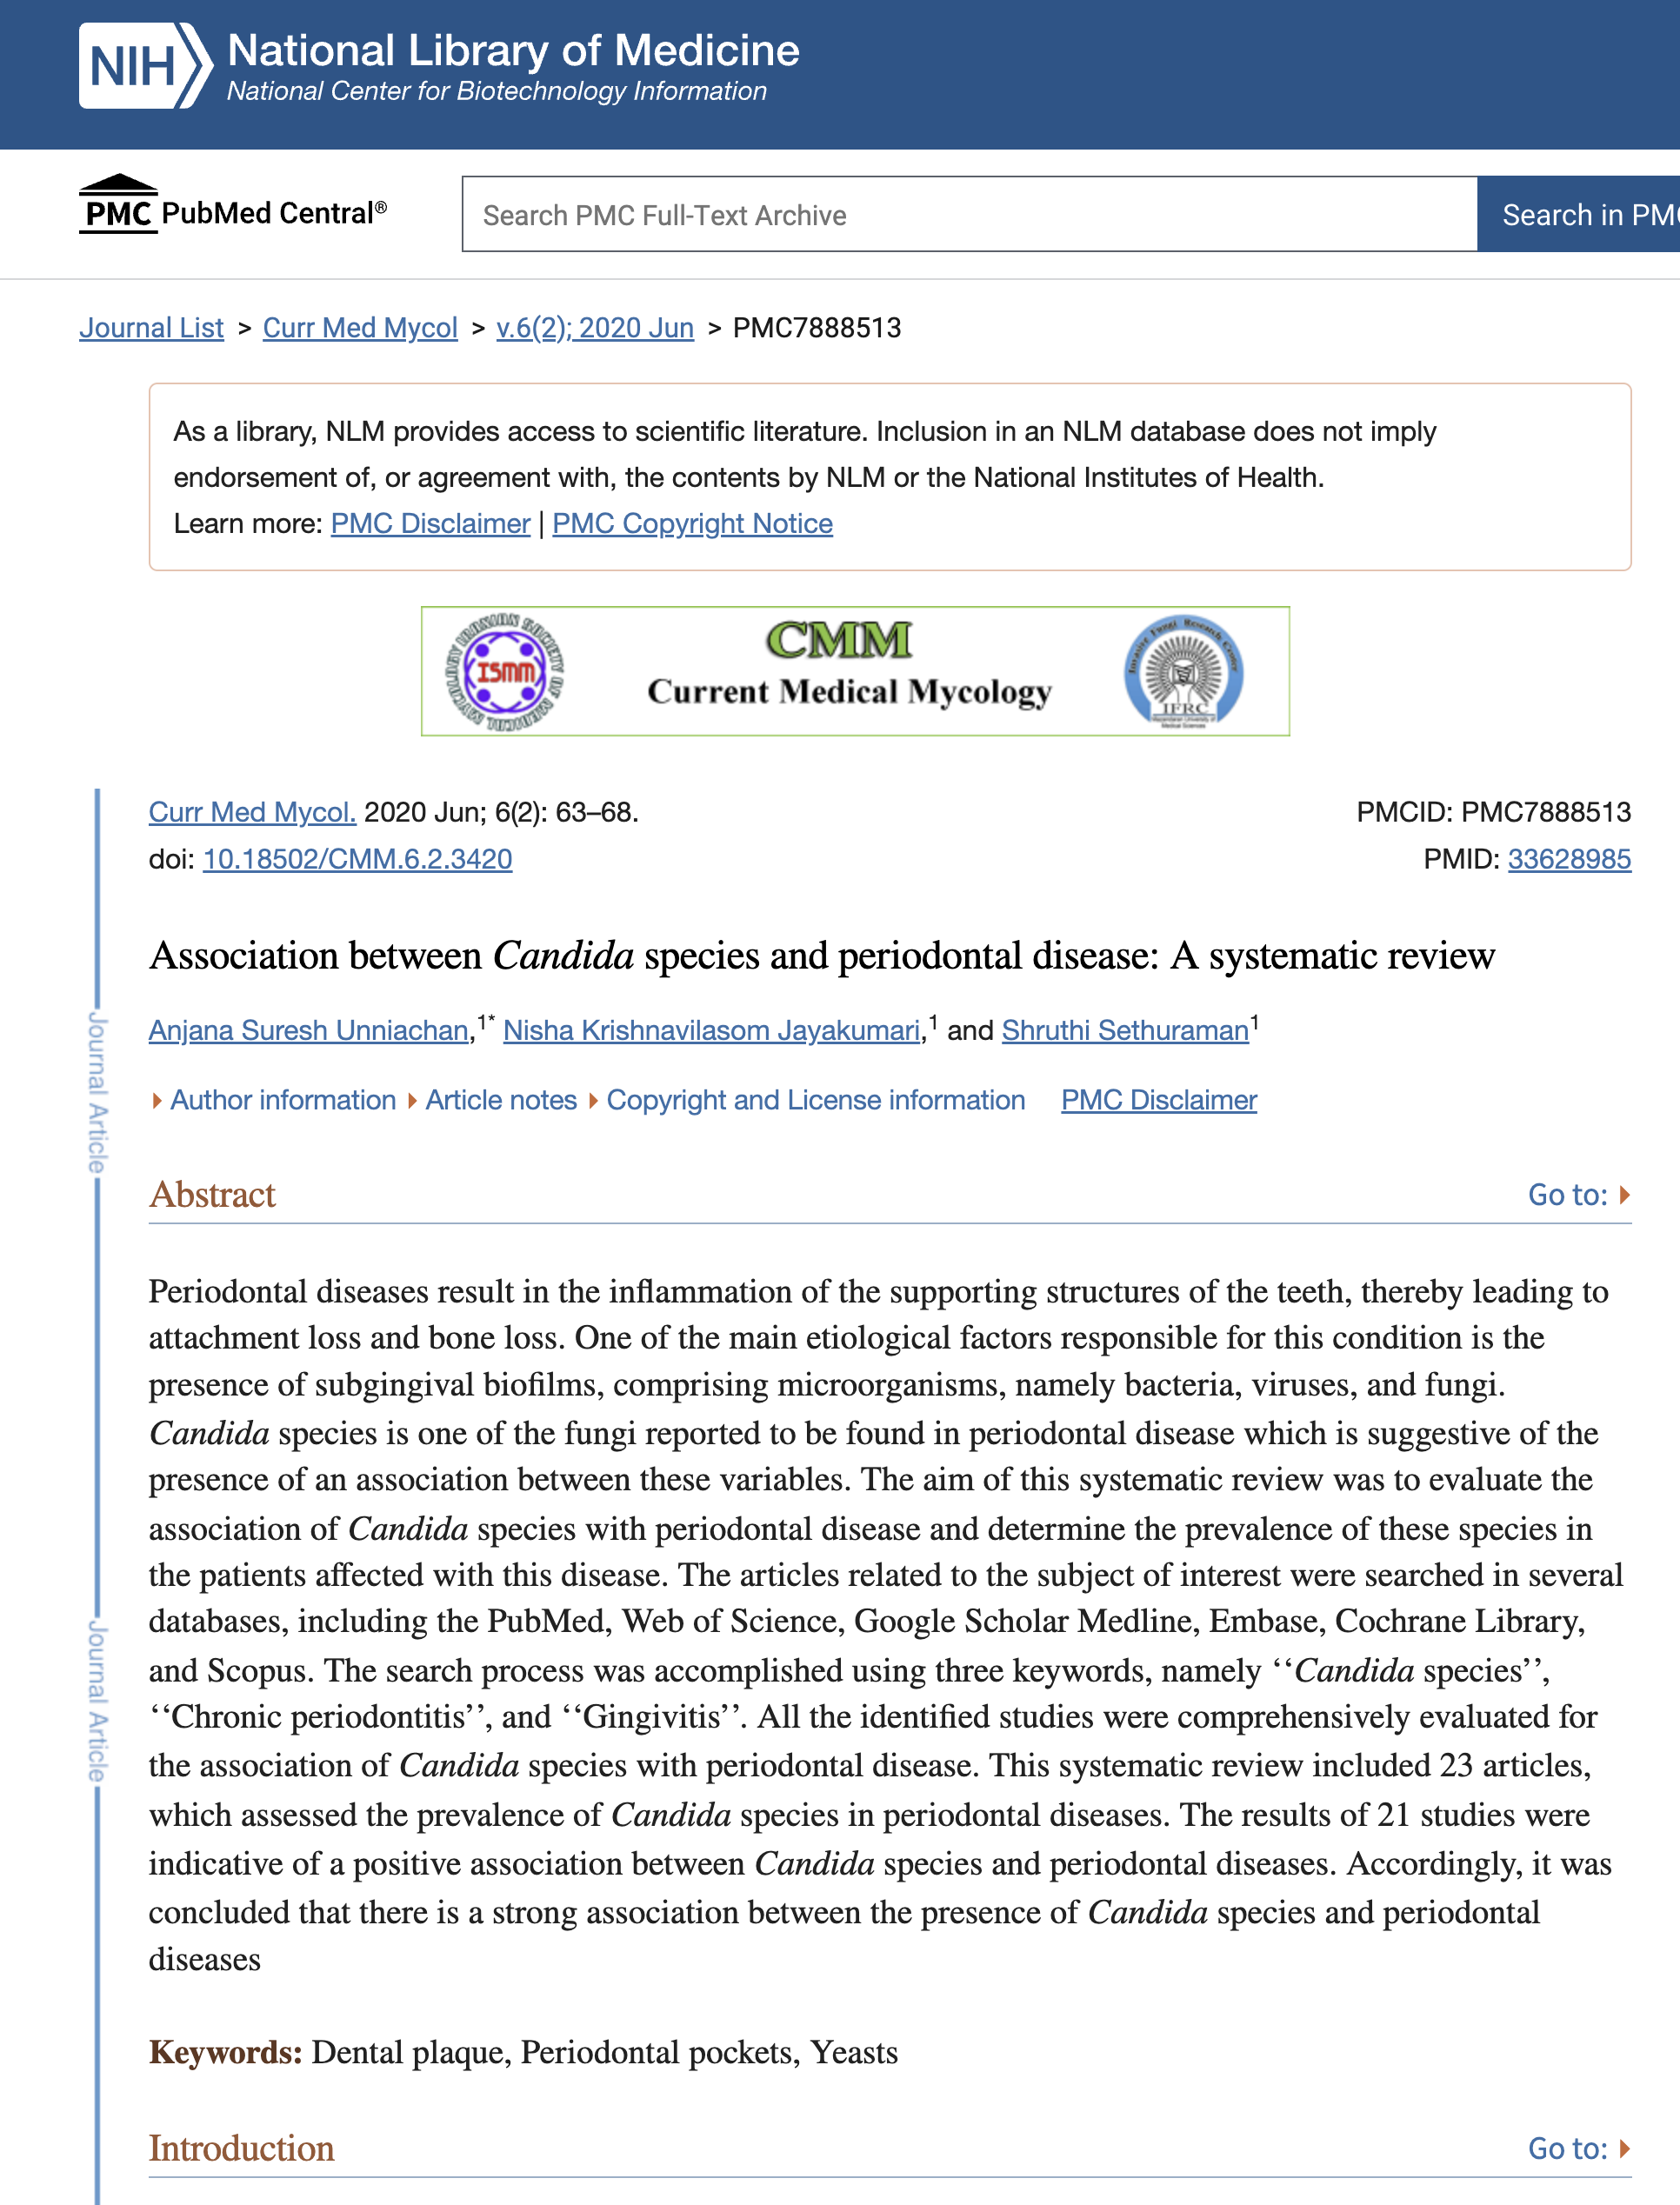 Association between Candida species and periodontal disease-A-systemtic-review